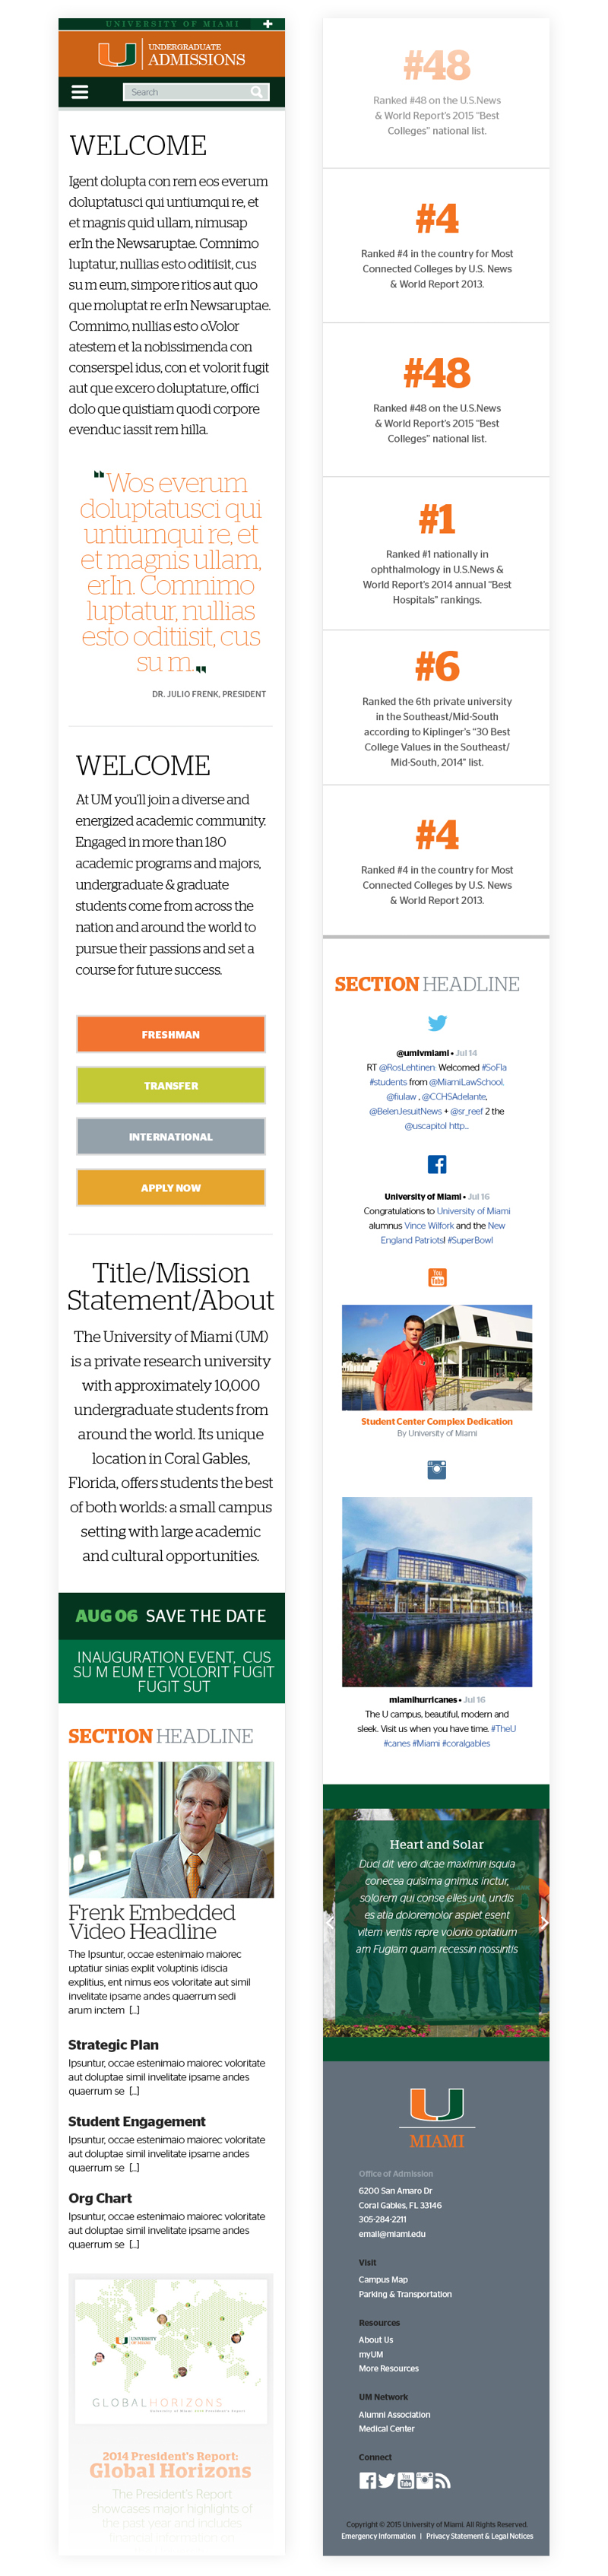 University of Miami Rebranding Global Components Mobile View